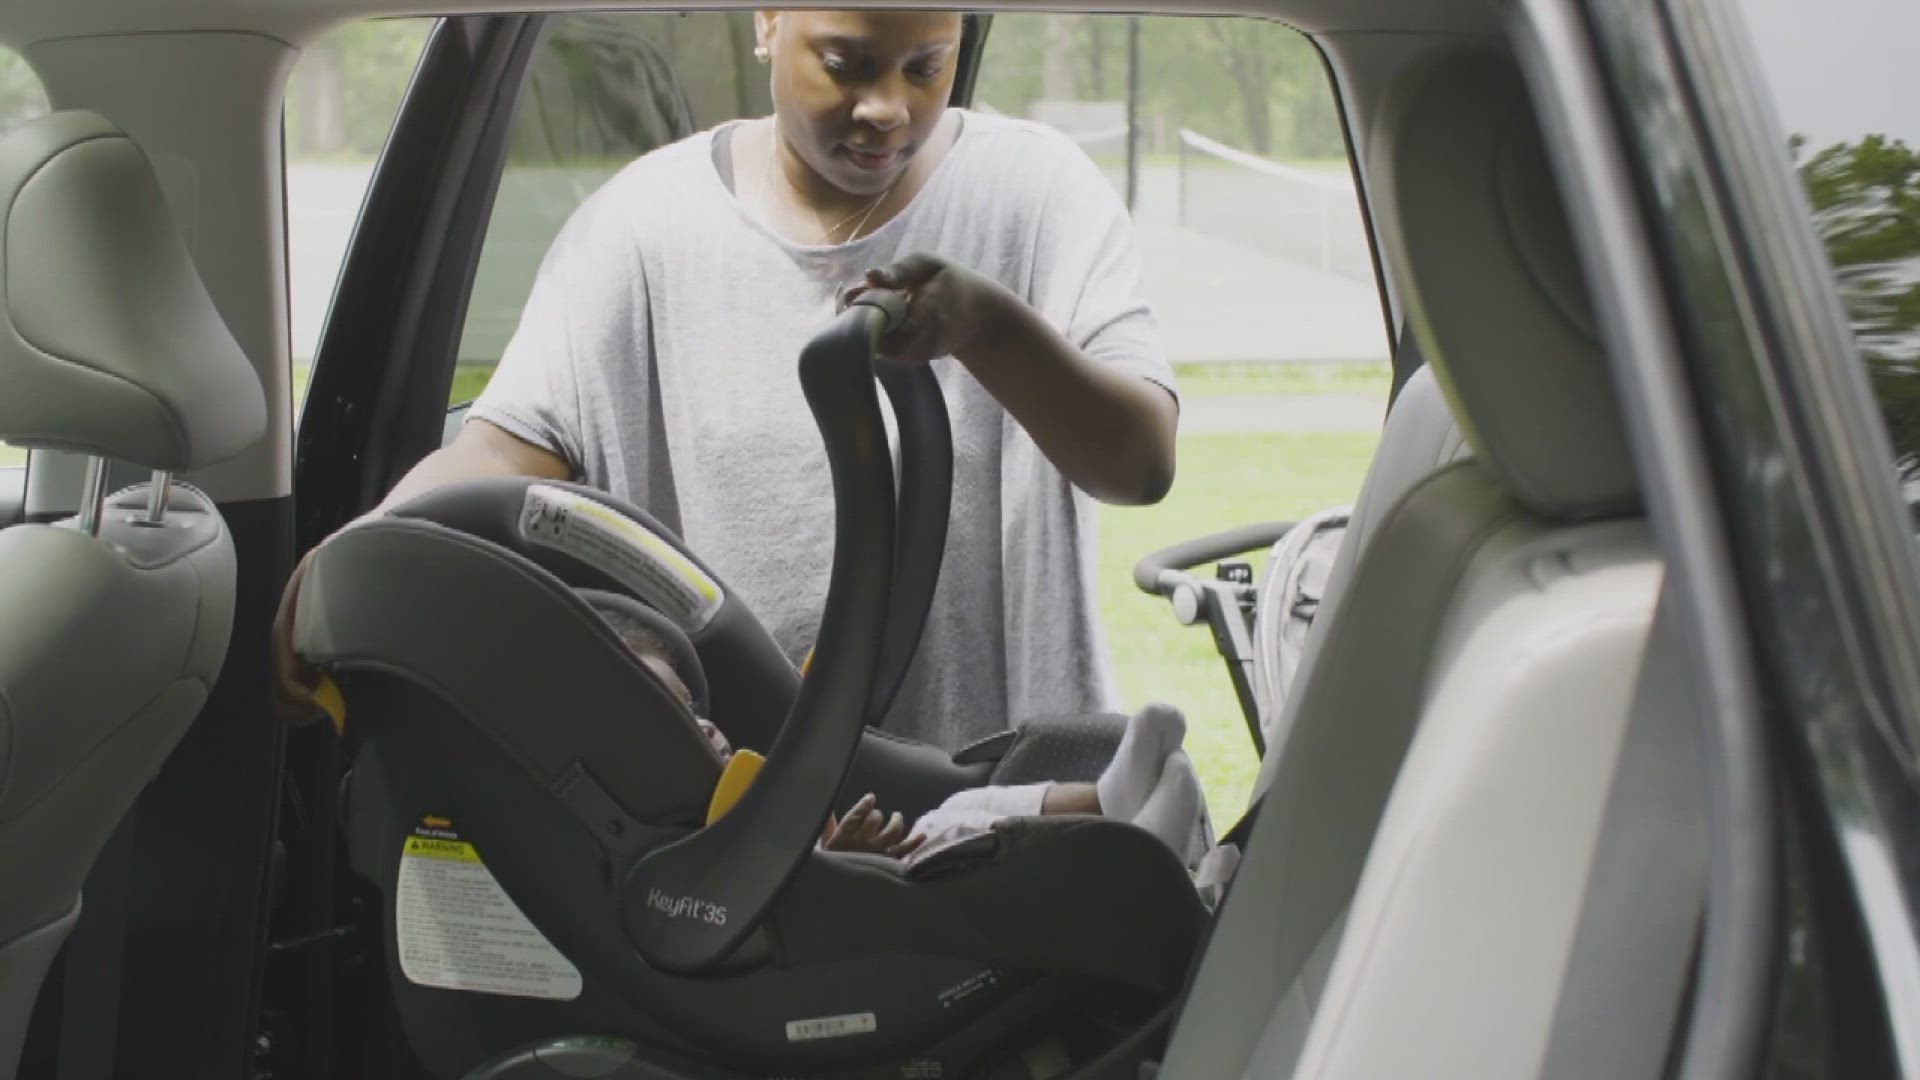 Consumer Reports used state-of-the-art science and testing to rate and recommend the safest seats for any budget.